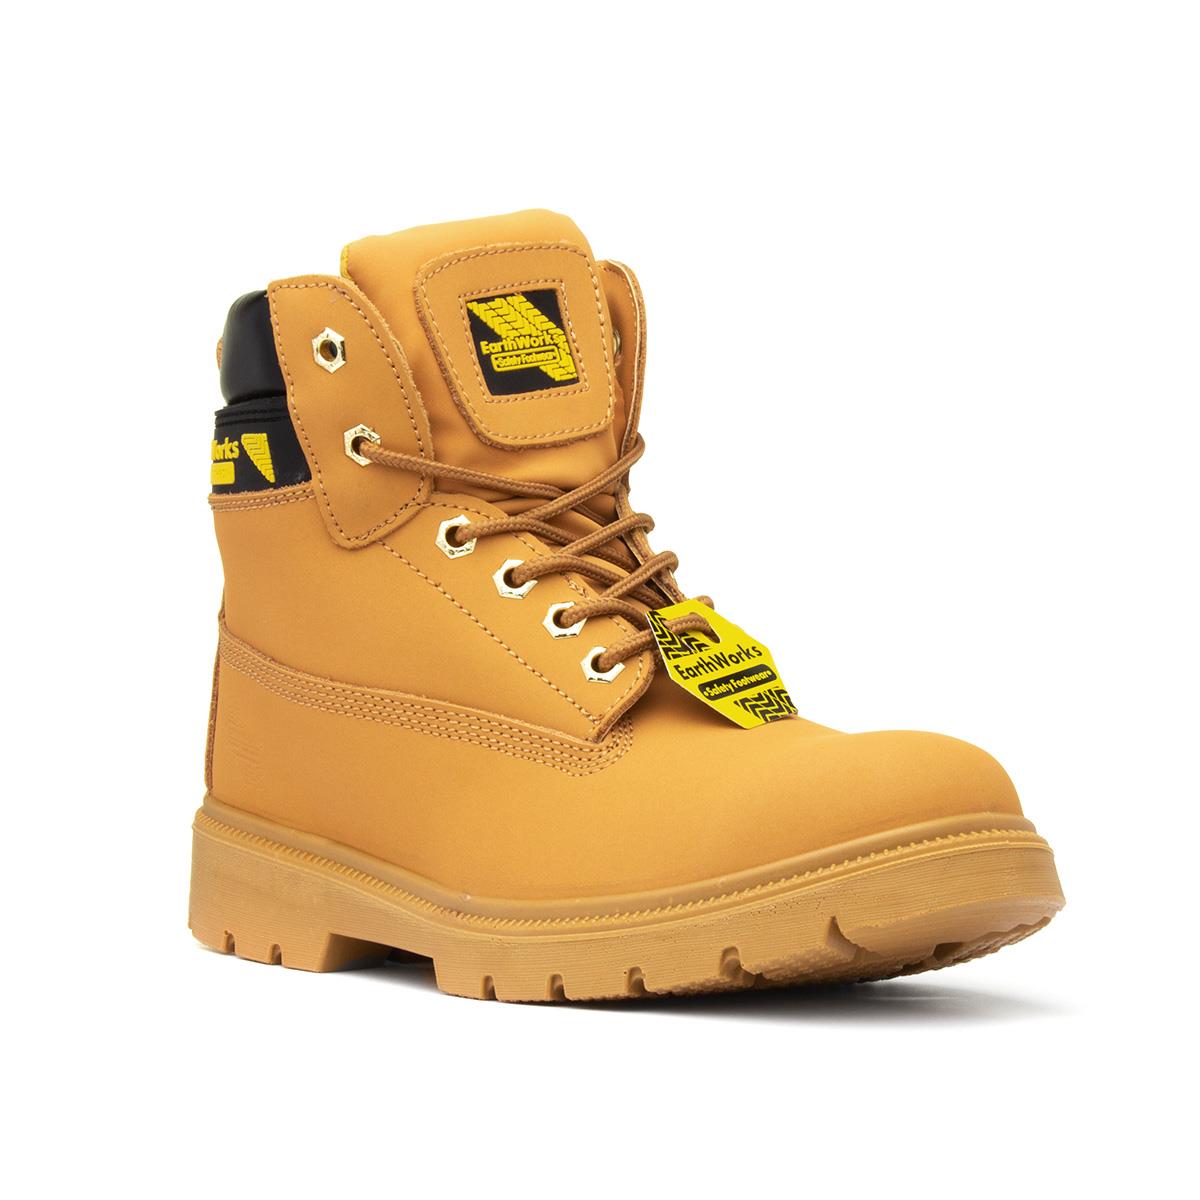 earth works safety boots